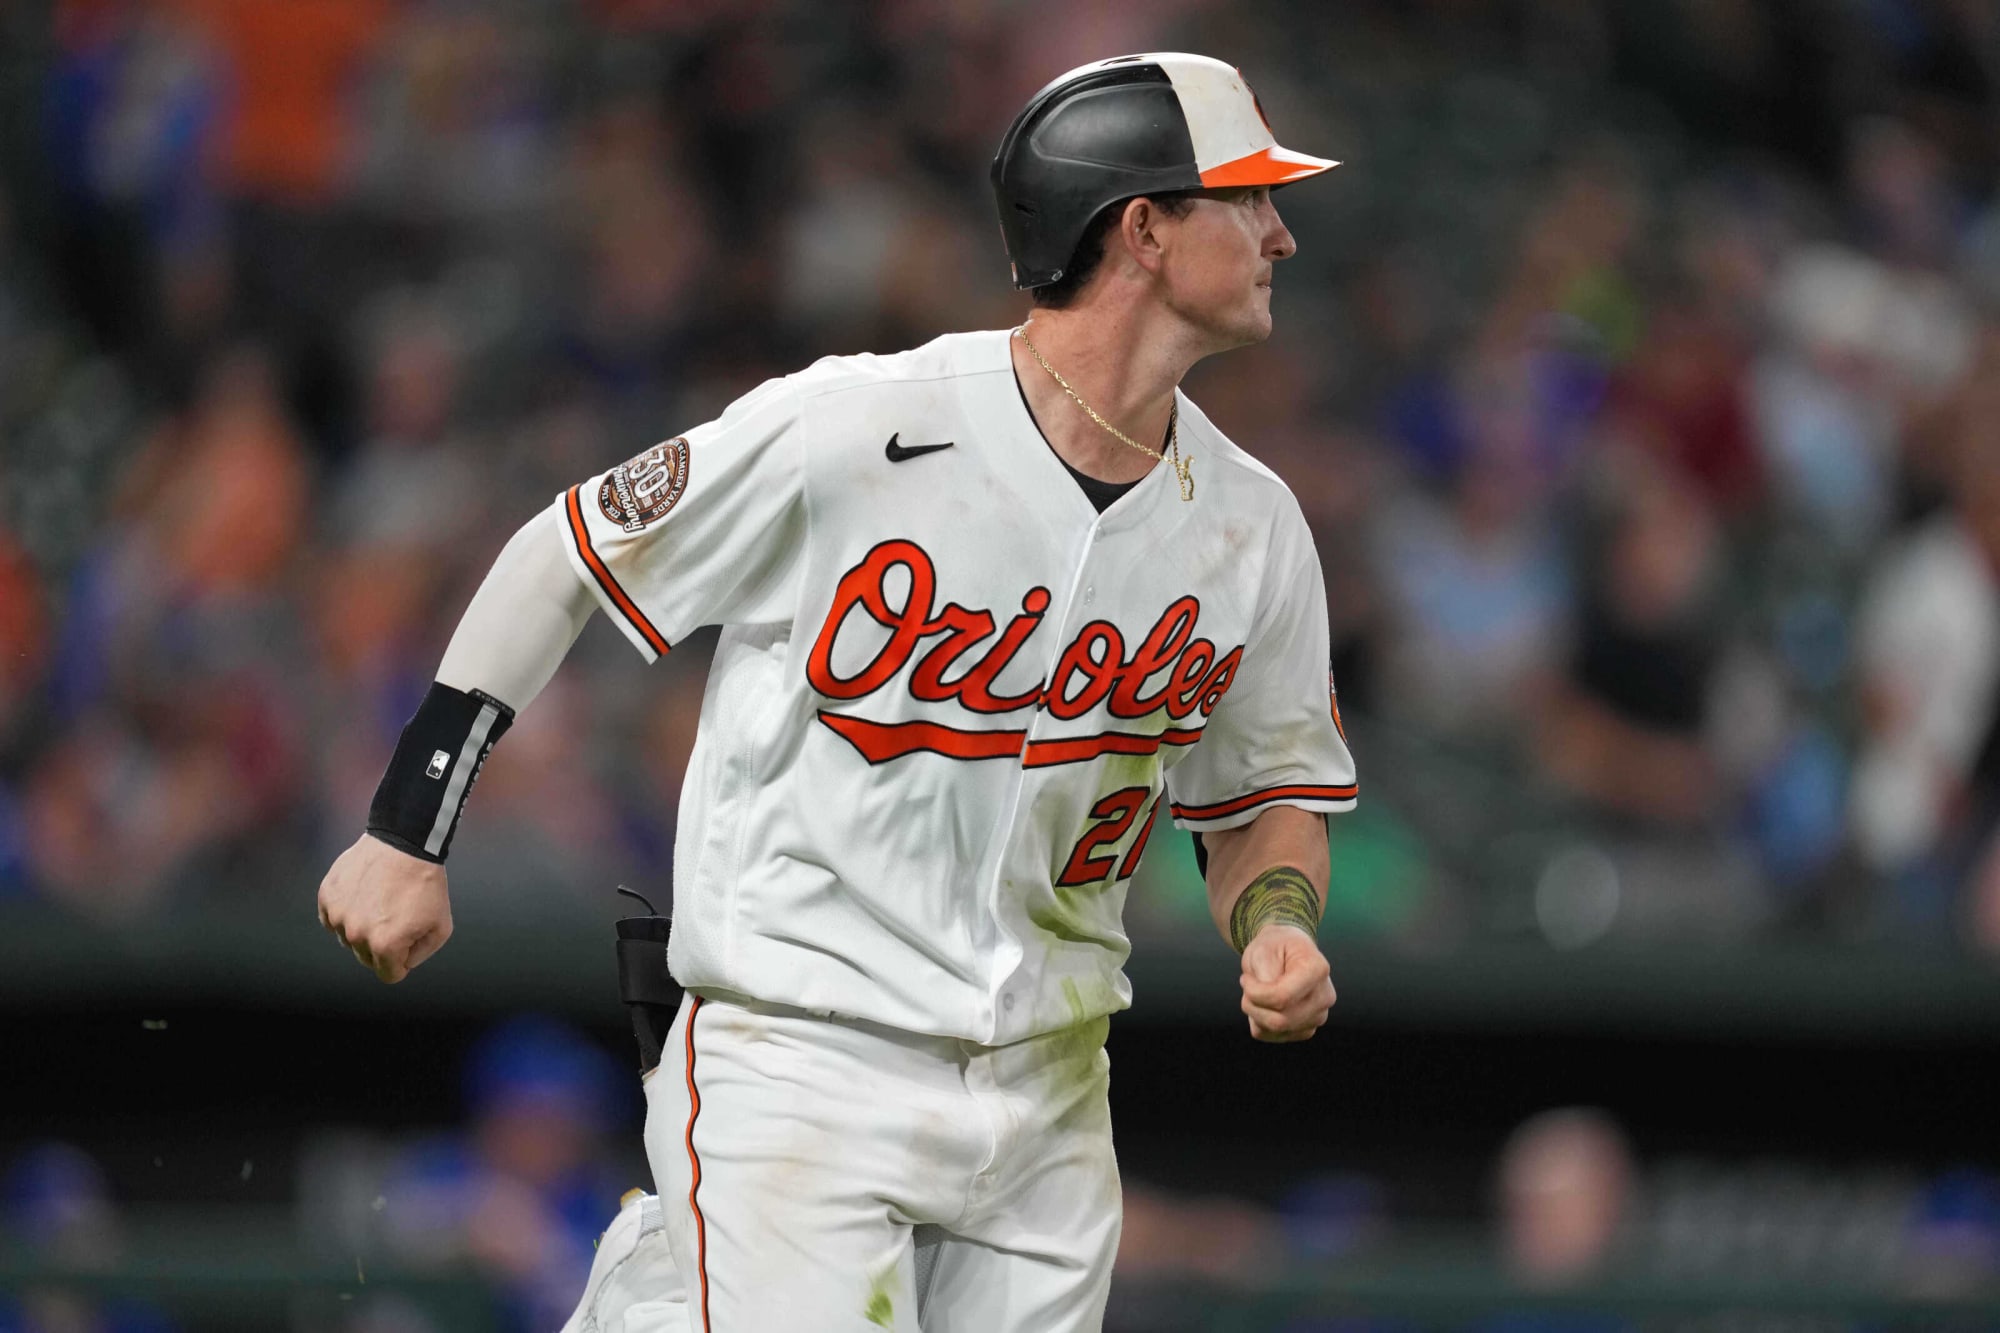 Austins Power: Hays and Voth will Return to Orioles in 2023